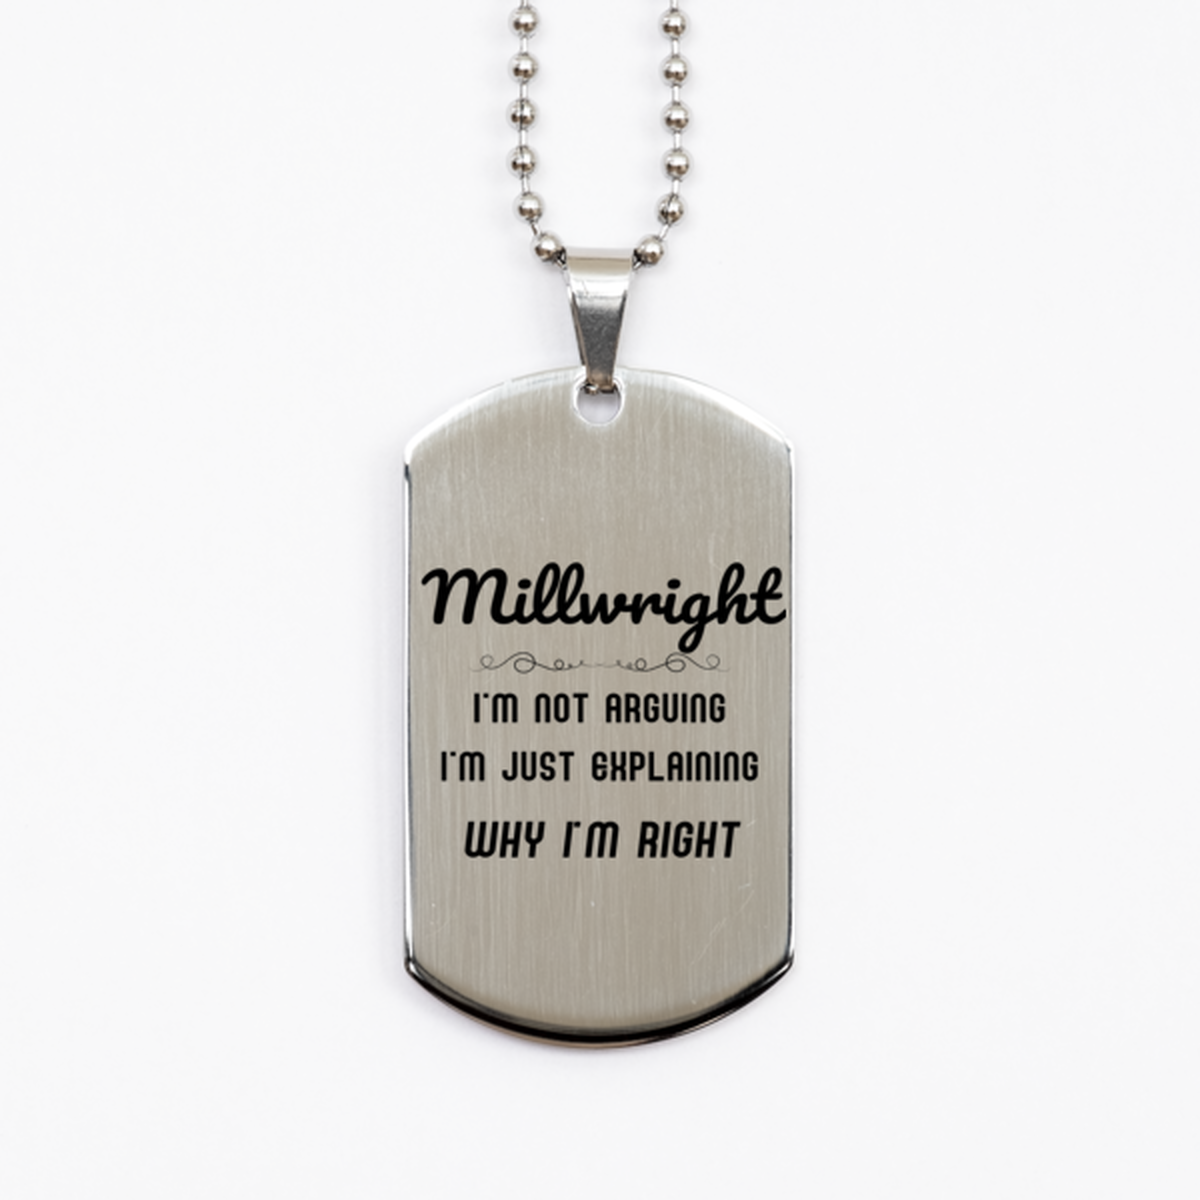 Millwright I'm not Arguing. I'm Just Explaining Why I'm RIGHT Silver Dog Tag, Funny Saying Quote Millwright Gifts For Millwright Graduation Birthday Christmas Gifts for Men Women Coworker